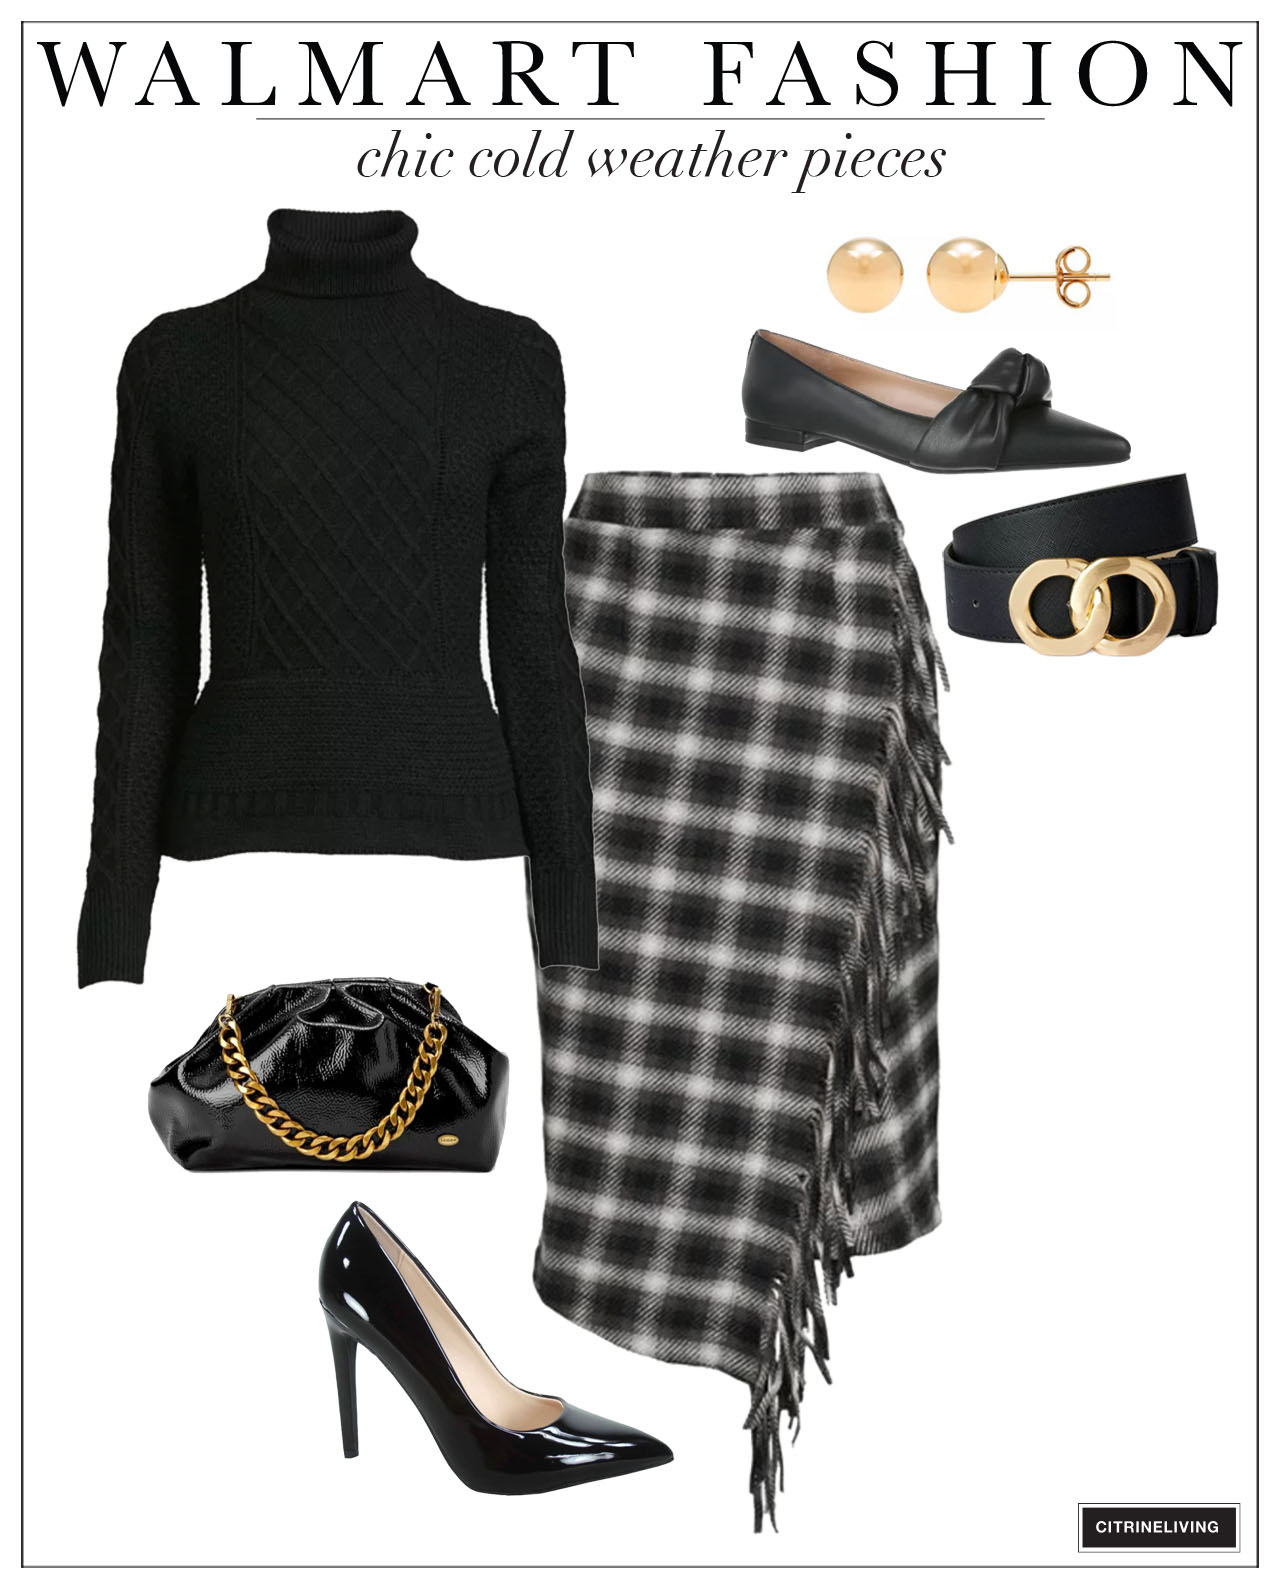 A gorgeous head to toe outfit from Walmart with a chic plaid black and white wrap skirt and black cable knit sweater. Paired with a black pump or flat for day to night dressing.